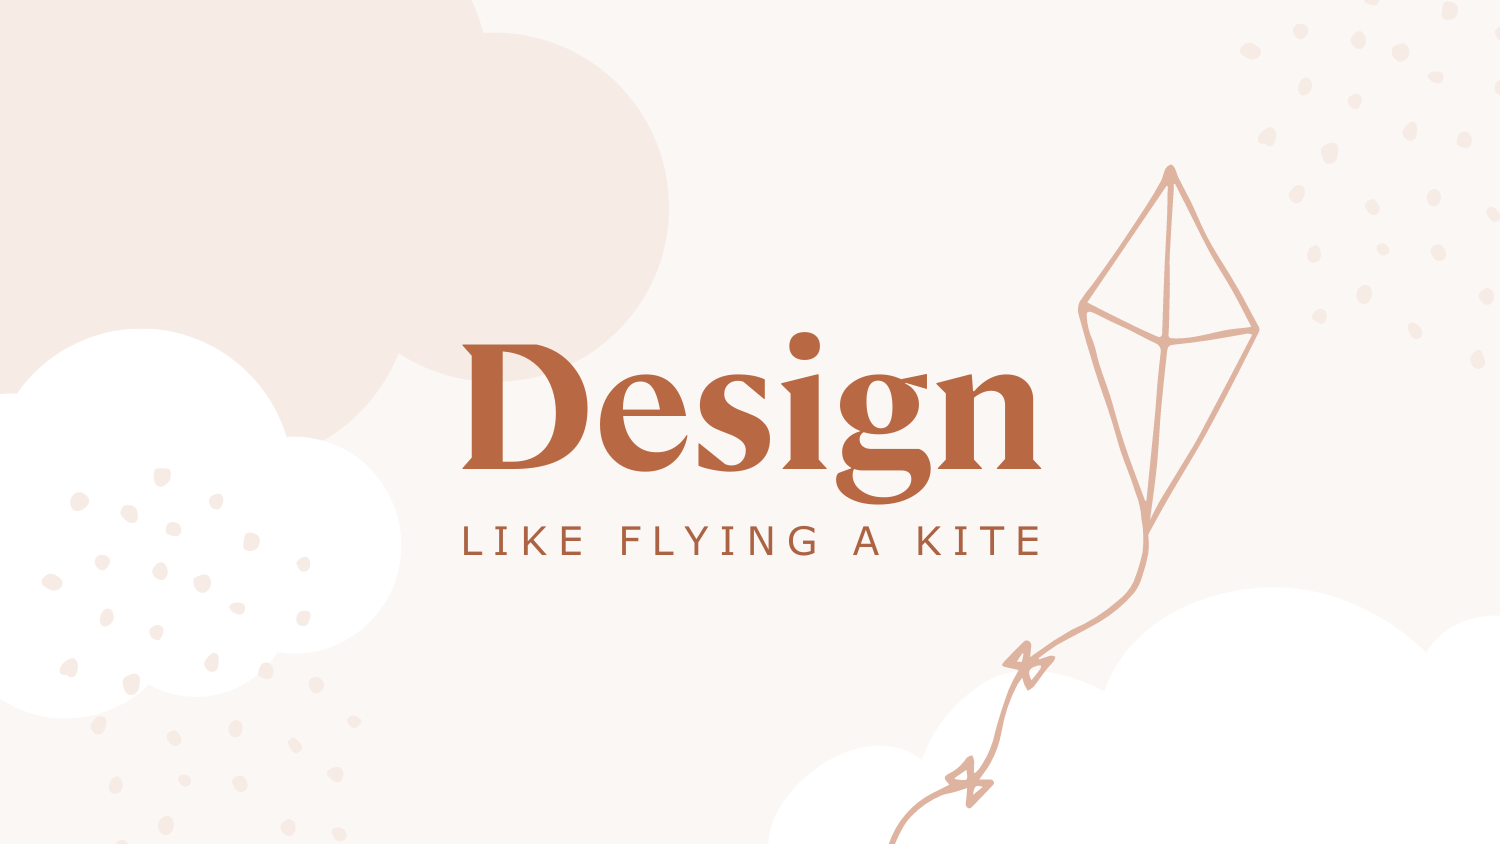 Designing is like flying a kite.